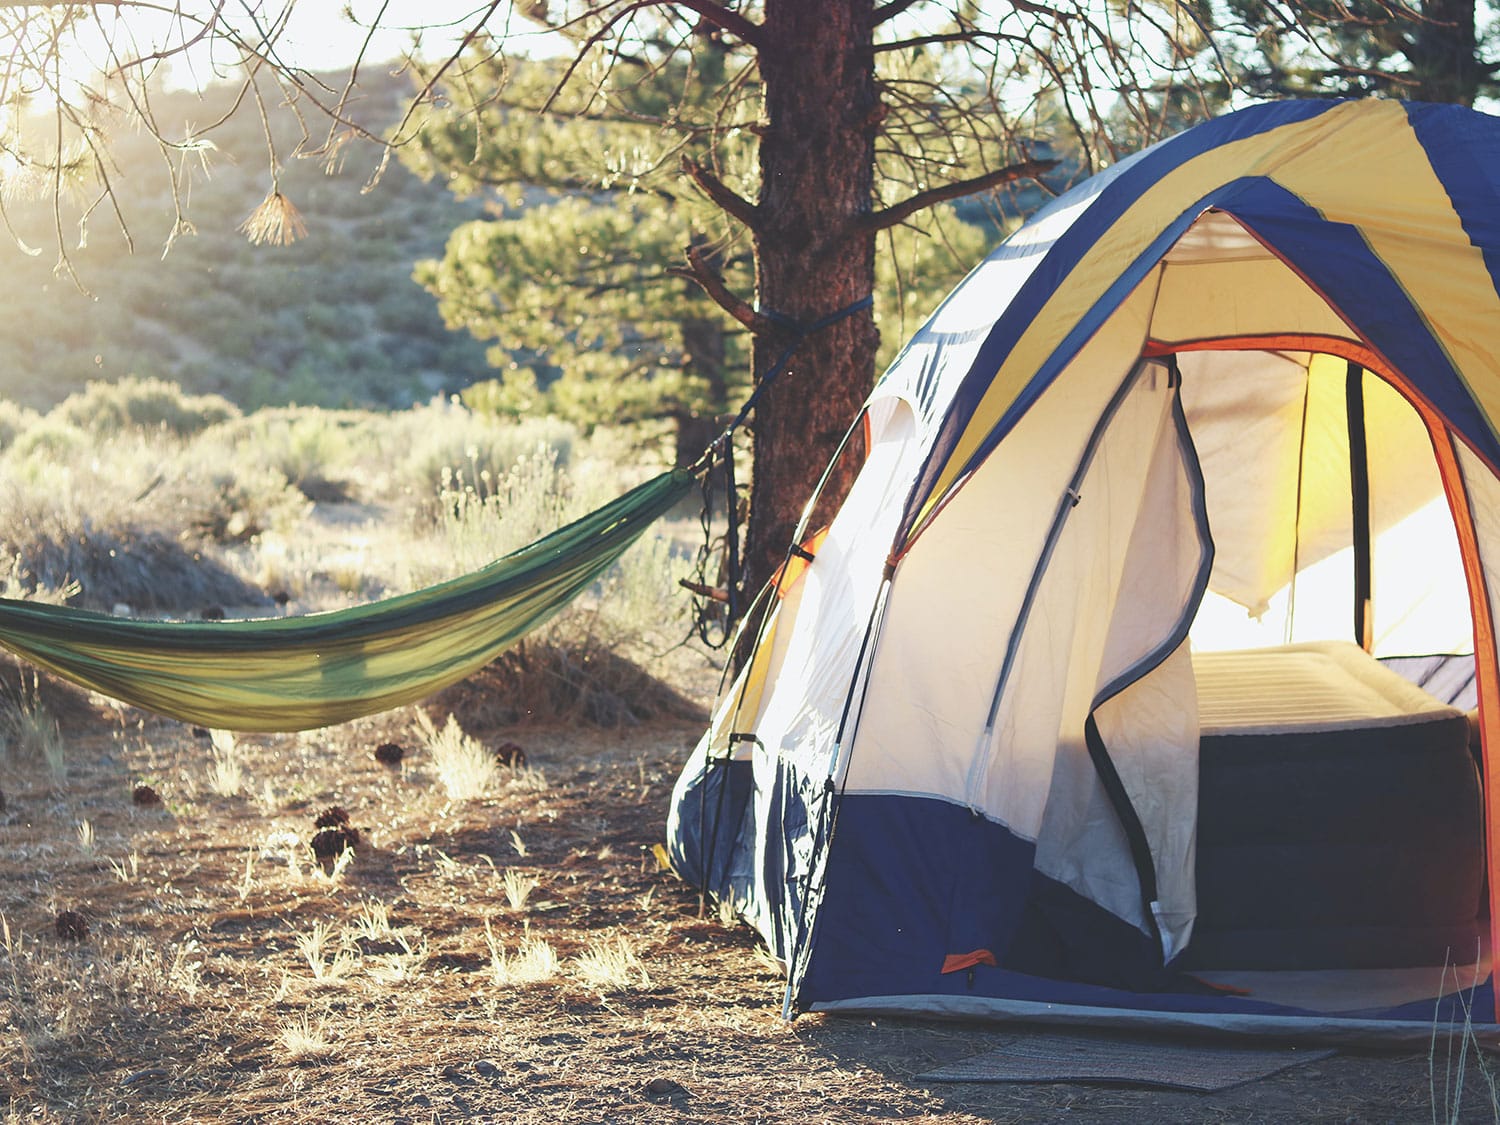 A camping tent and hammock.